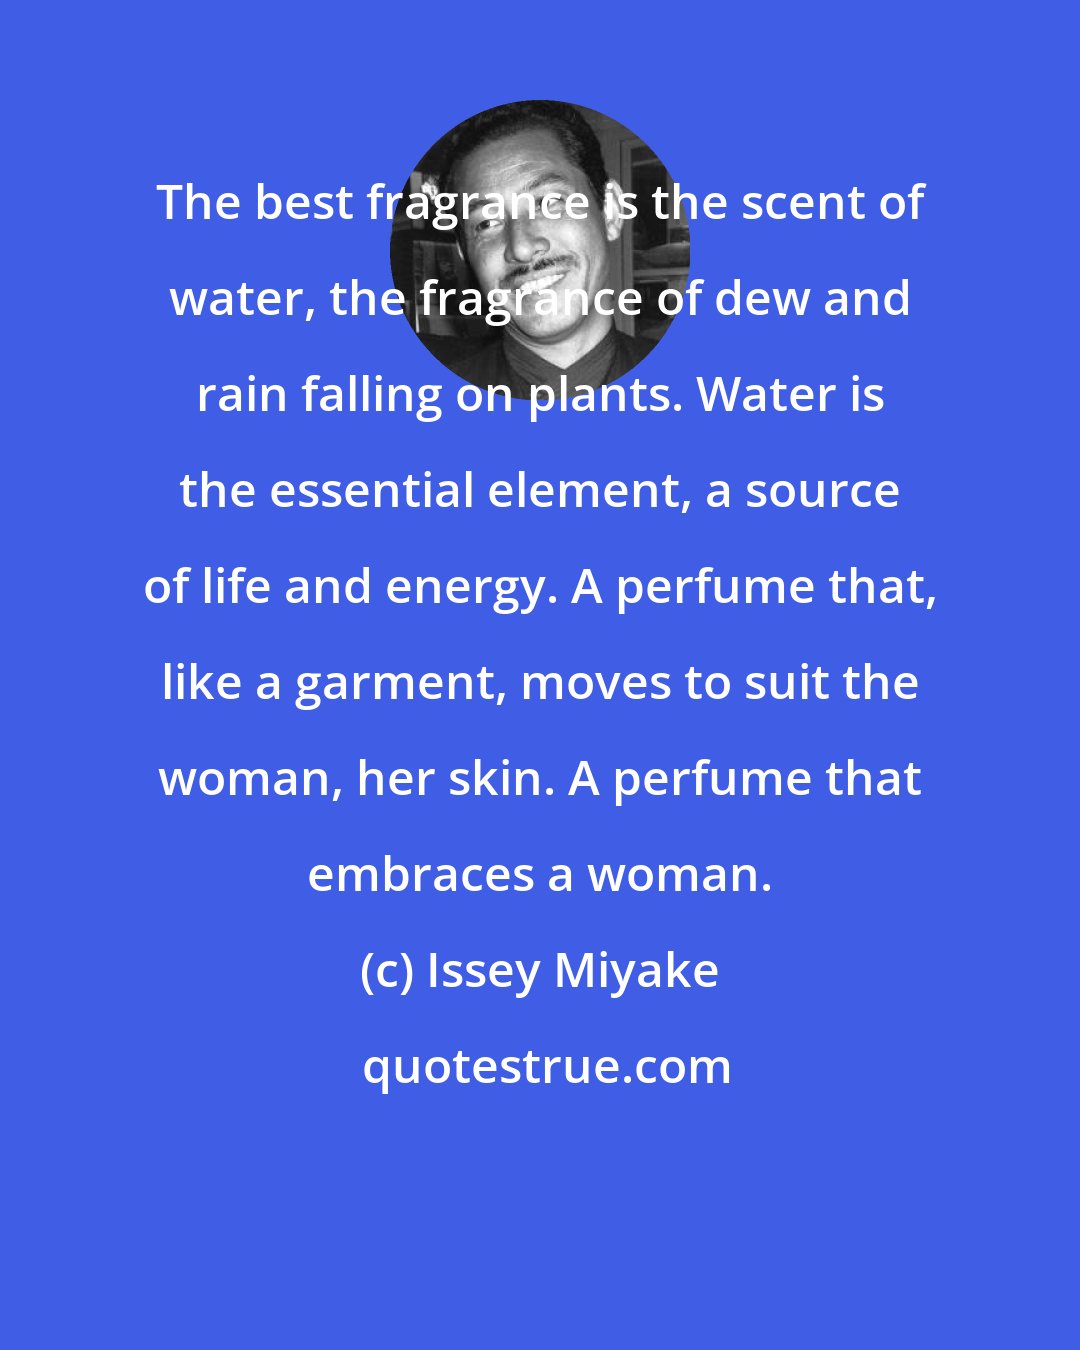 Issey Miyake: The best fragrance is the scent of water, the fragrance of dew and rain falling on plants. Water is the essential element, a source of life and energy. A perfume that, like a garment, moves to suit the woman, her skin. A perfume that embraces a woman.